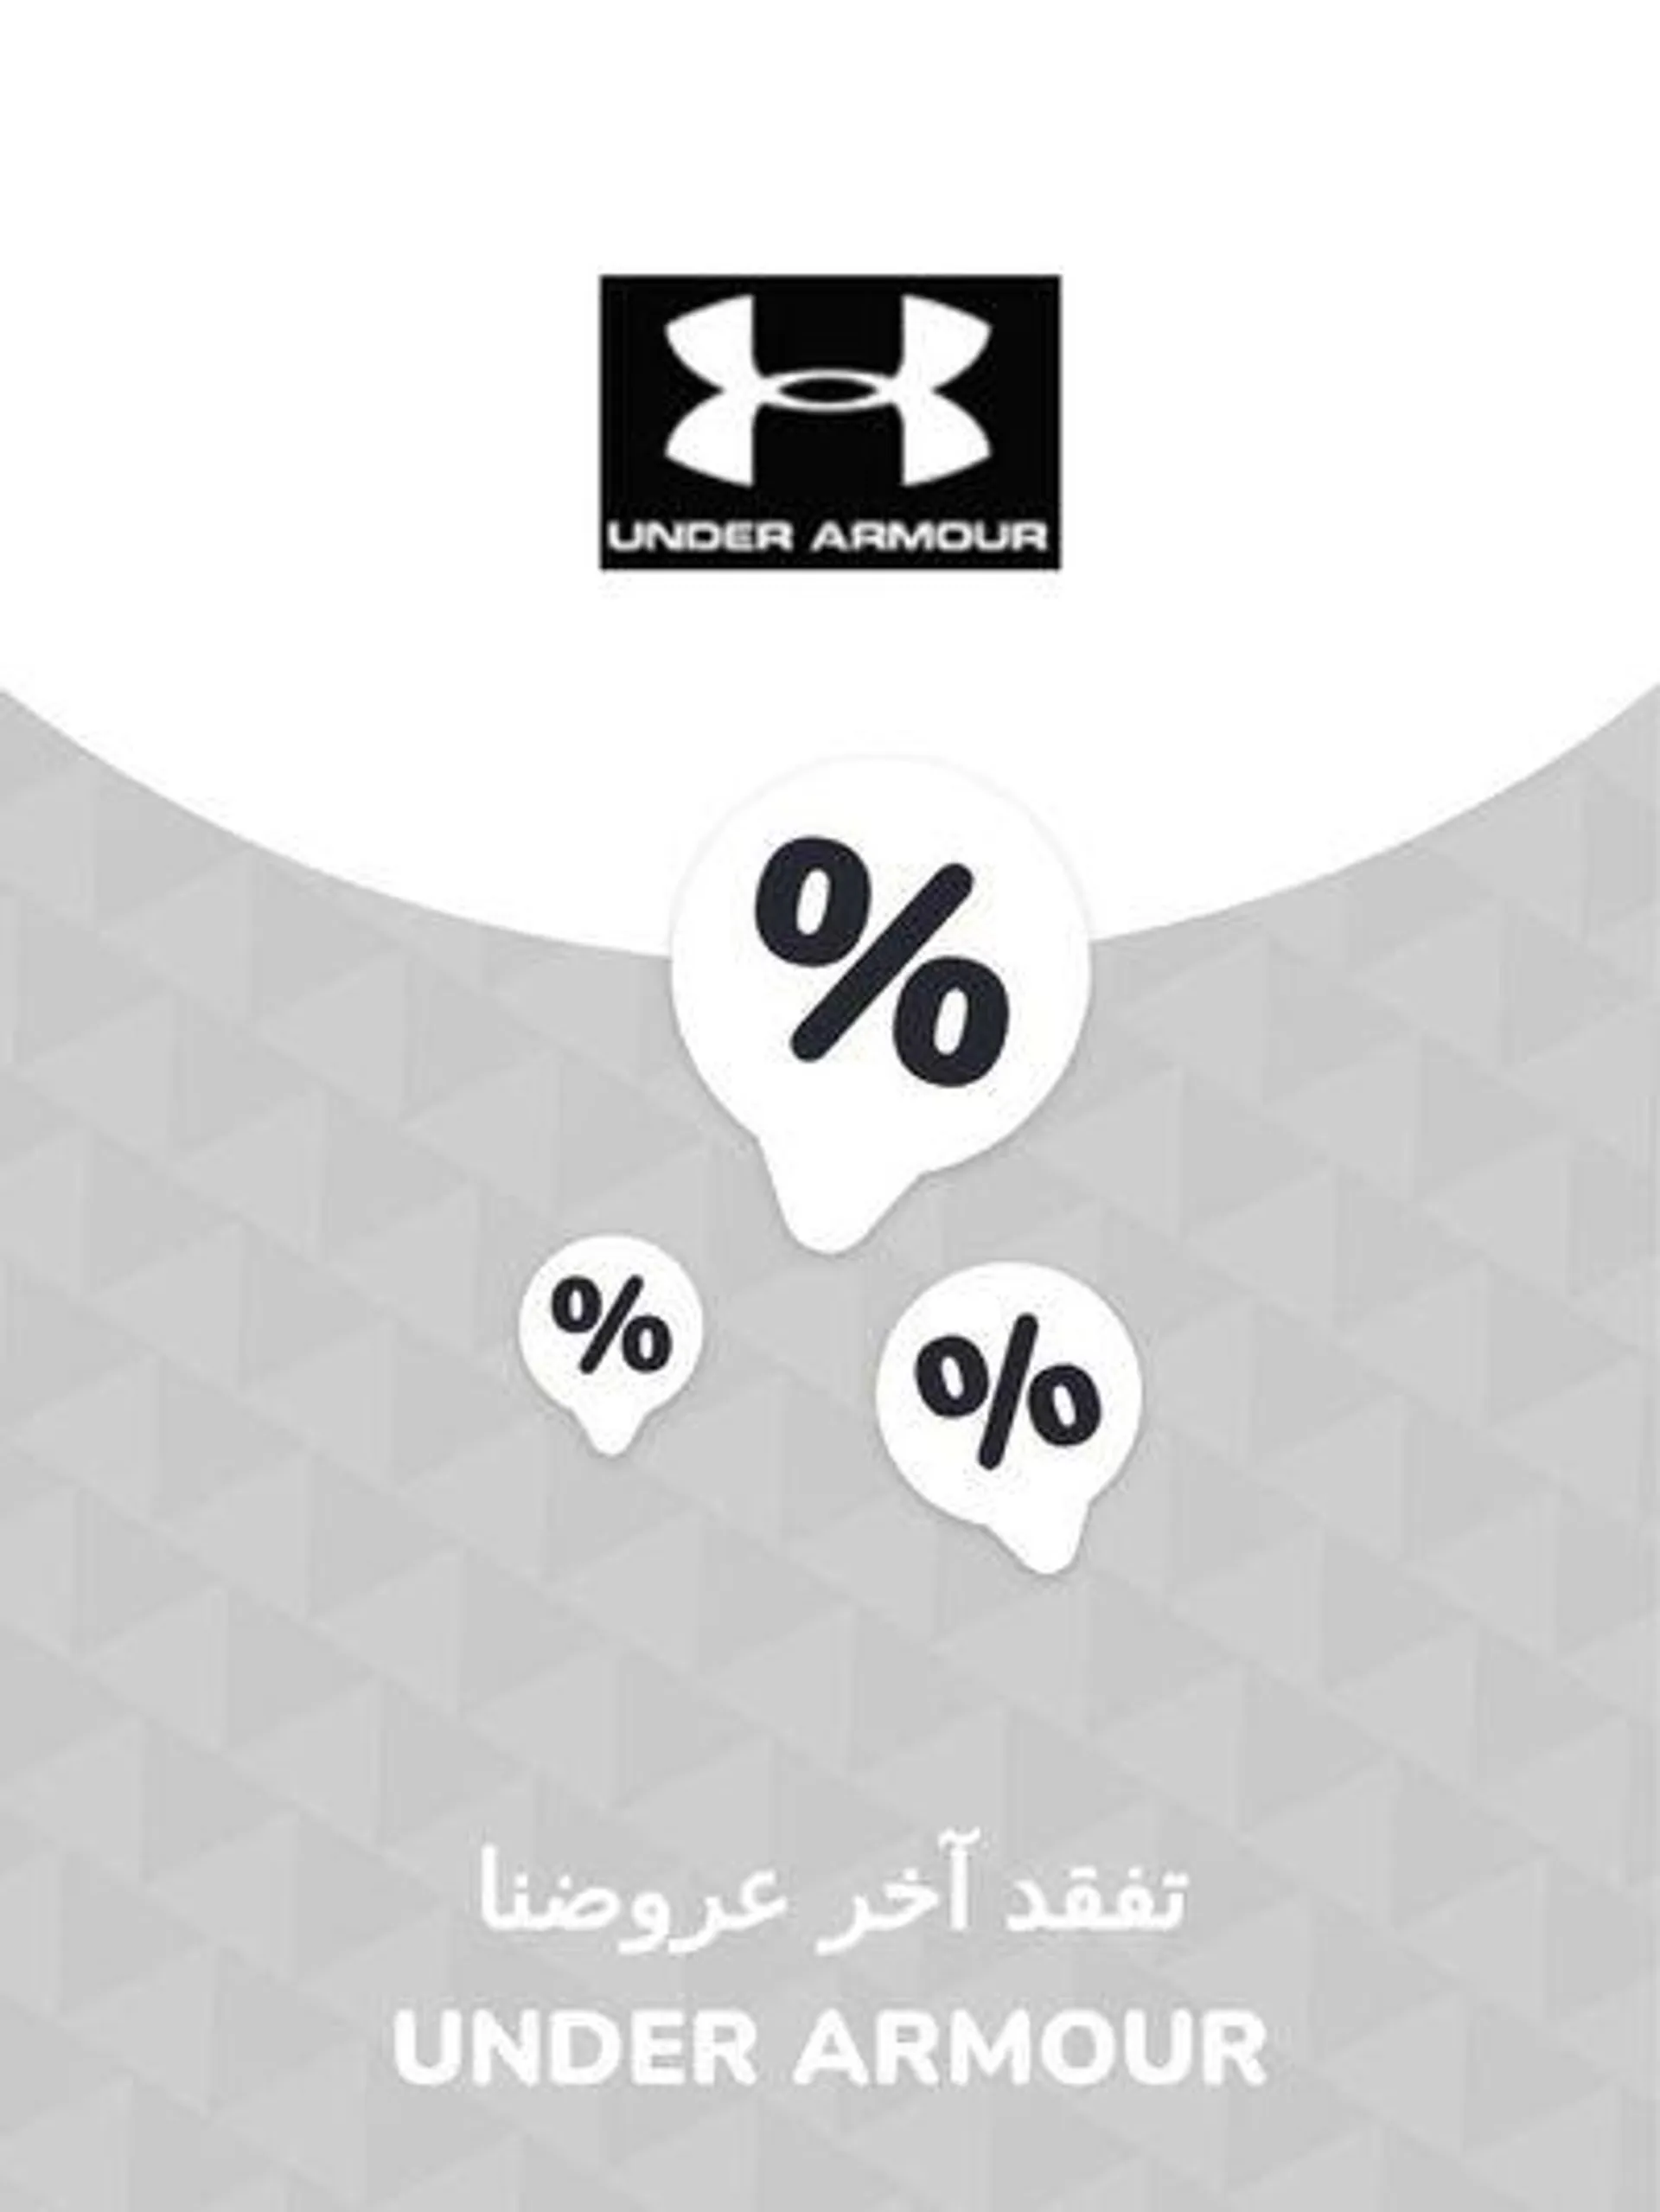 Offers Under Armour - 1